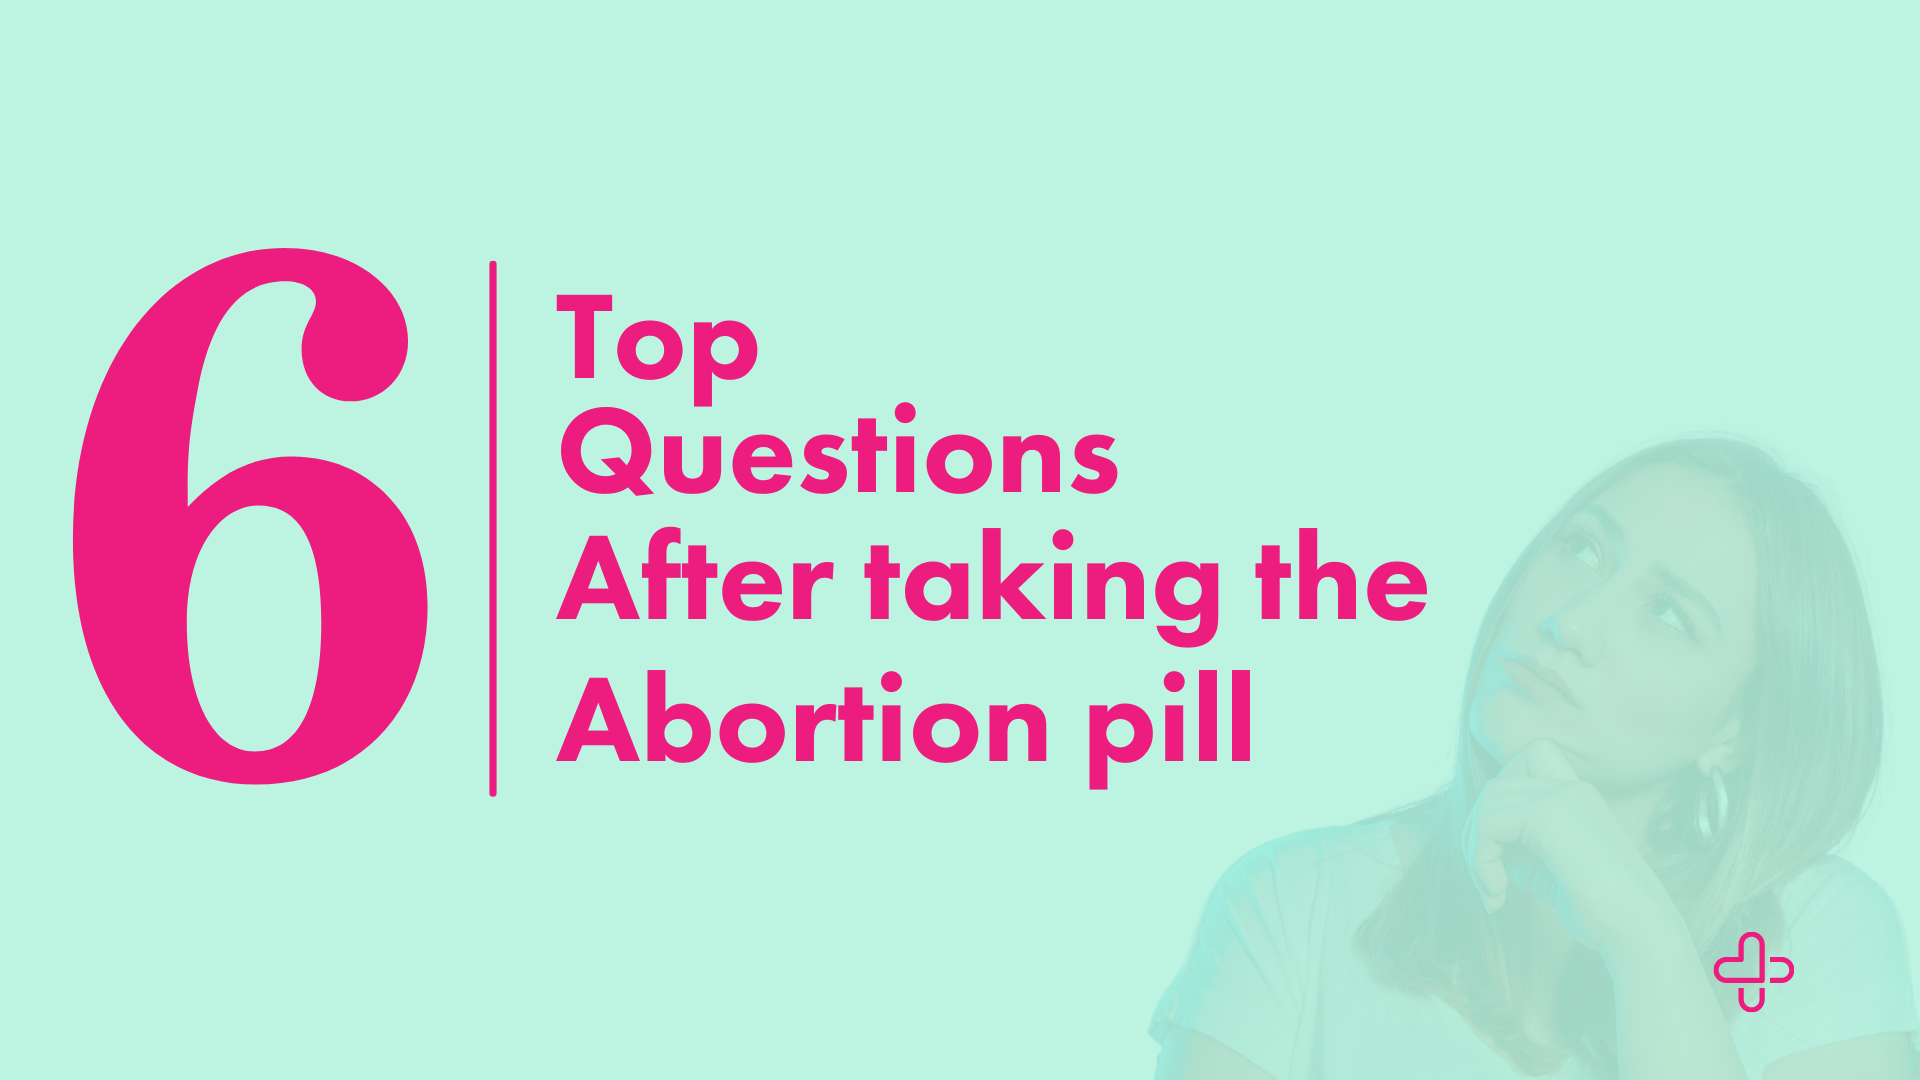 The 6 most common questions after taking the abortion pill